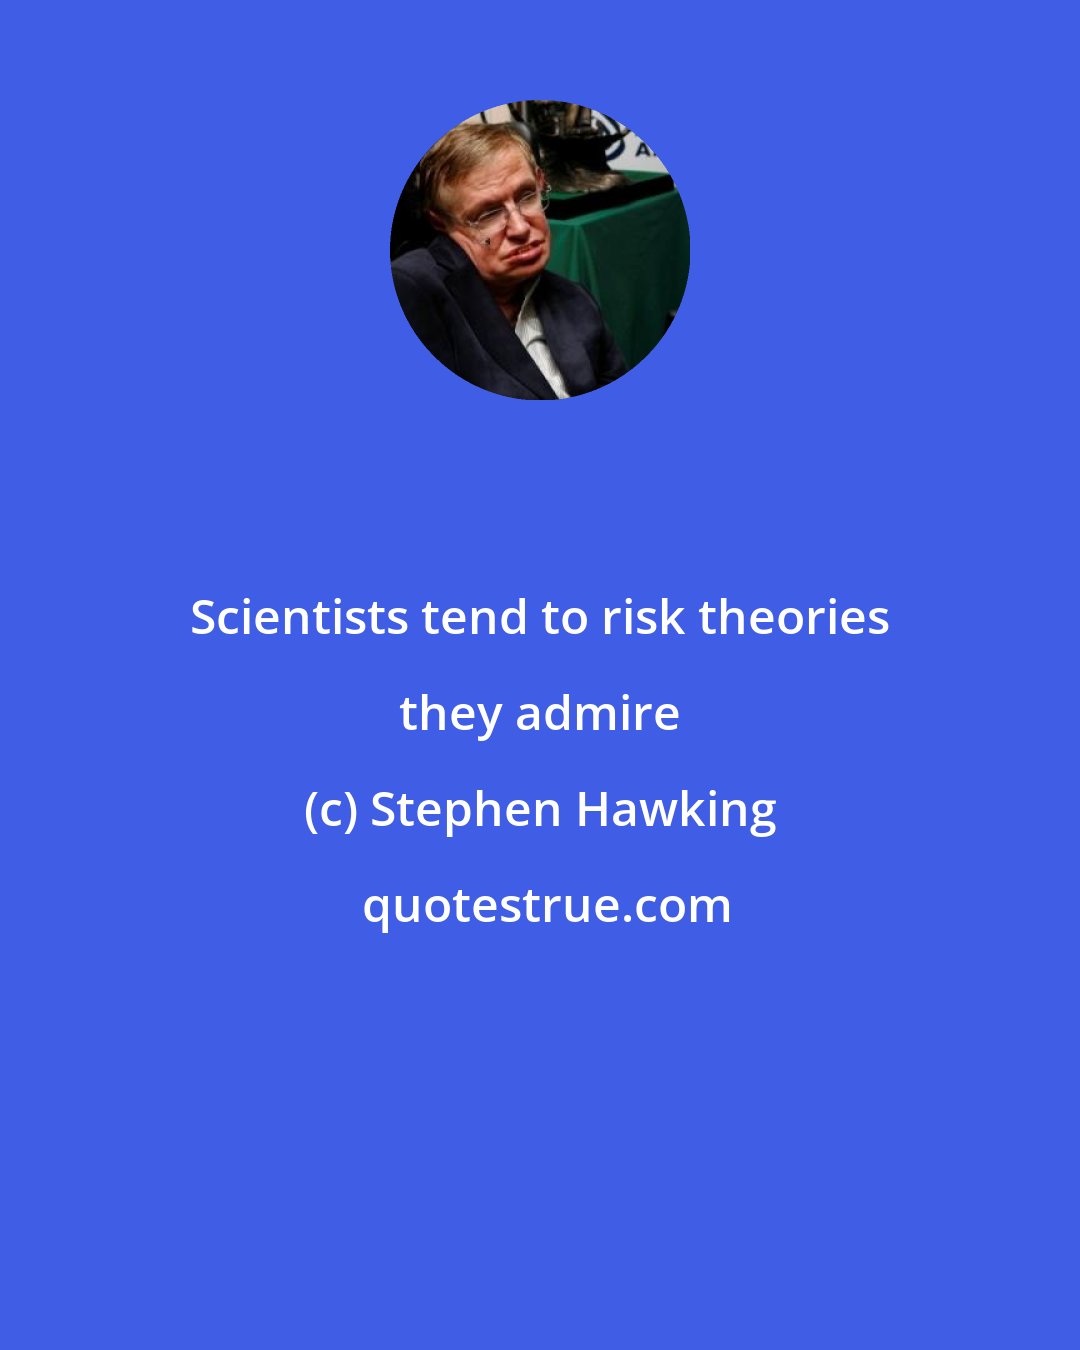 Stephen Hawking: Scientists tend to risk theories they admire